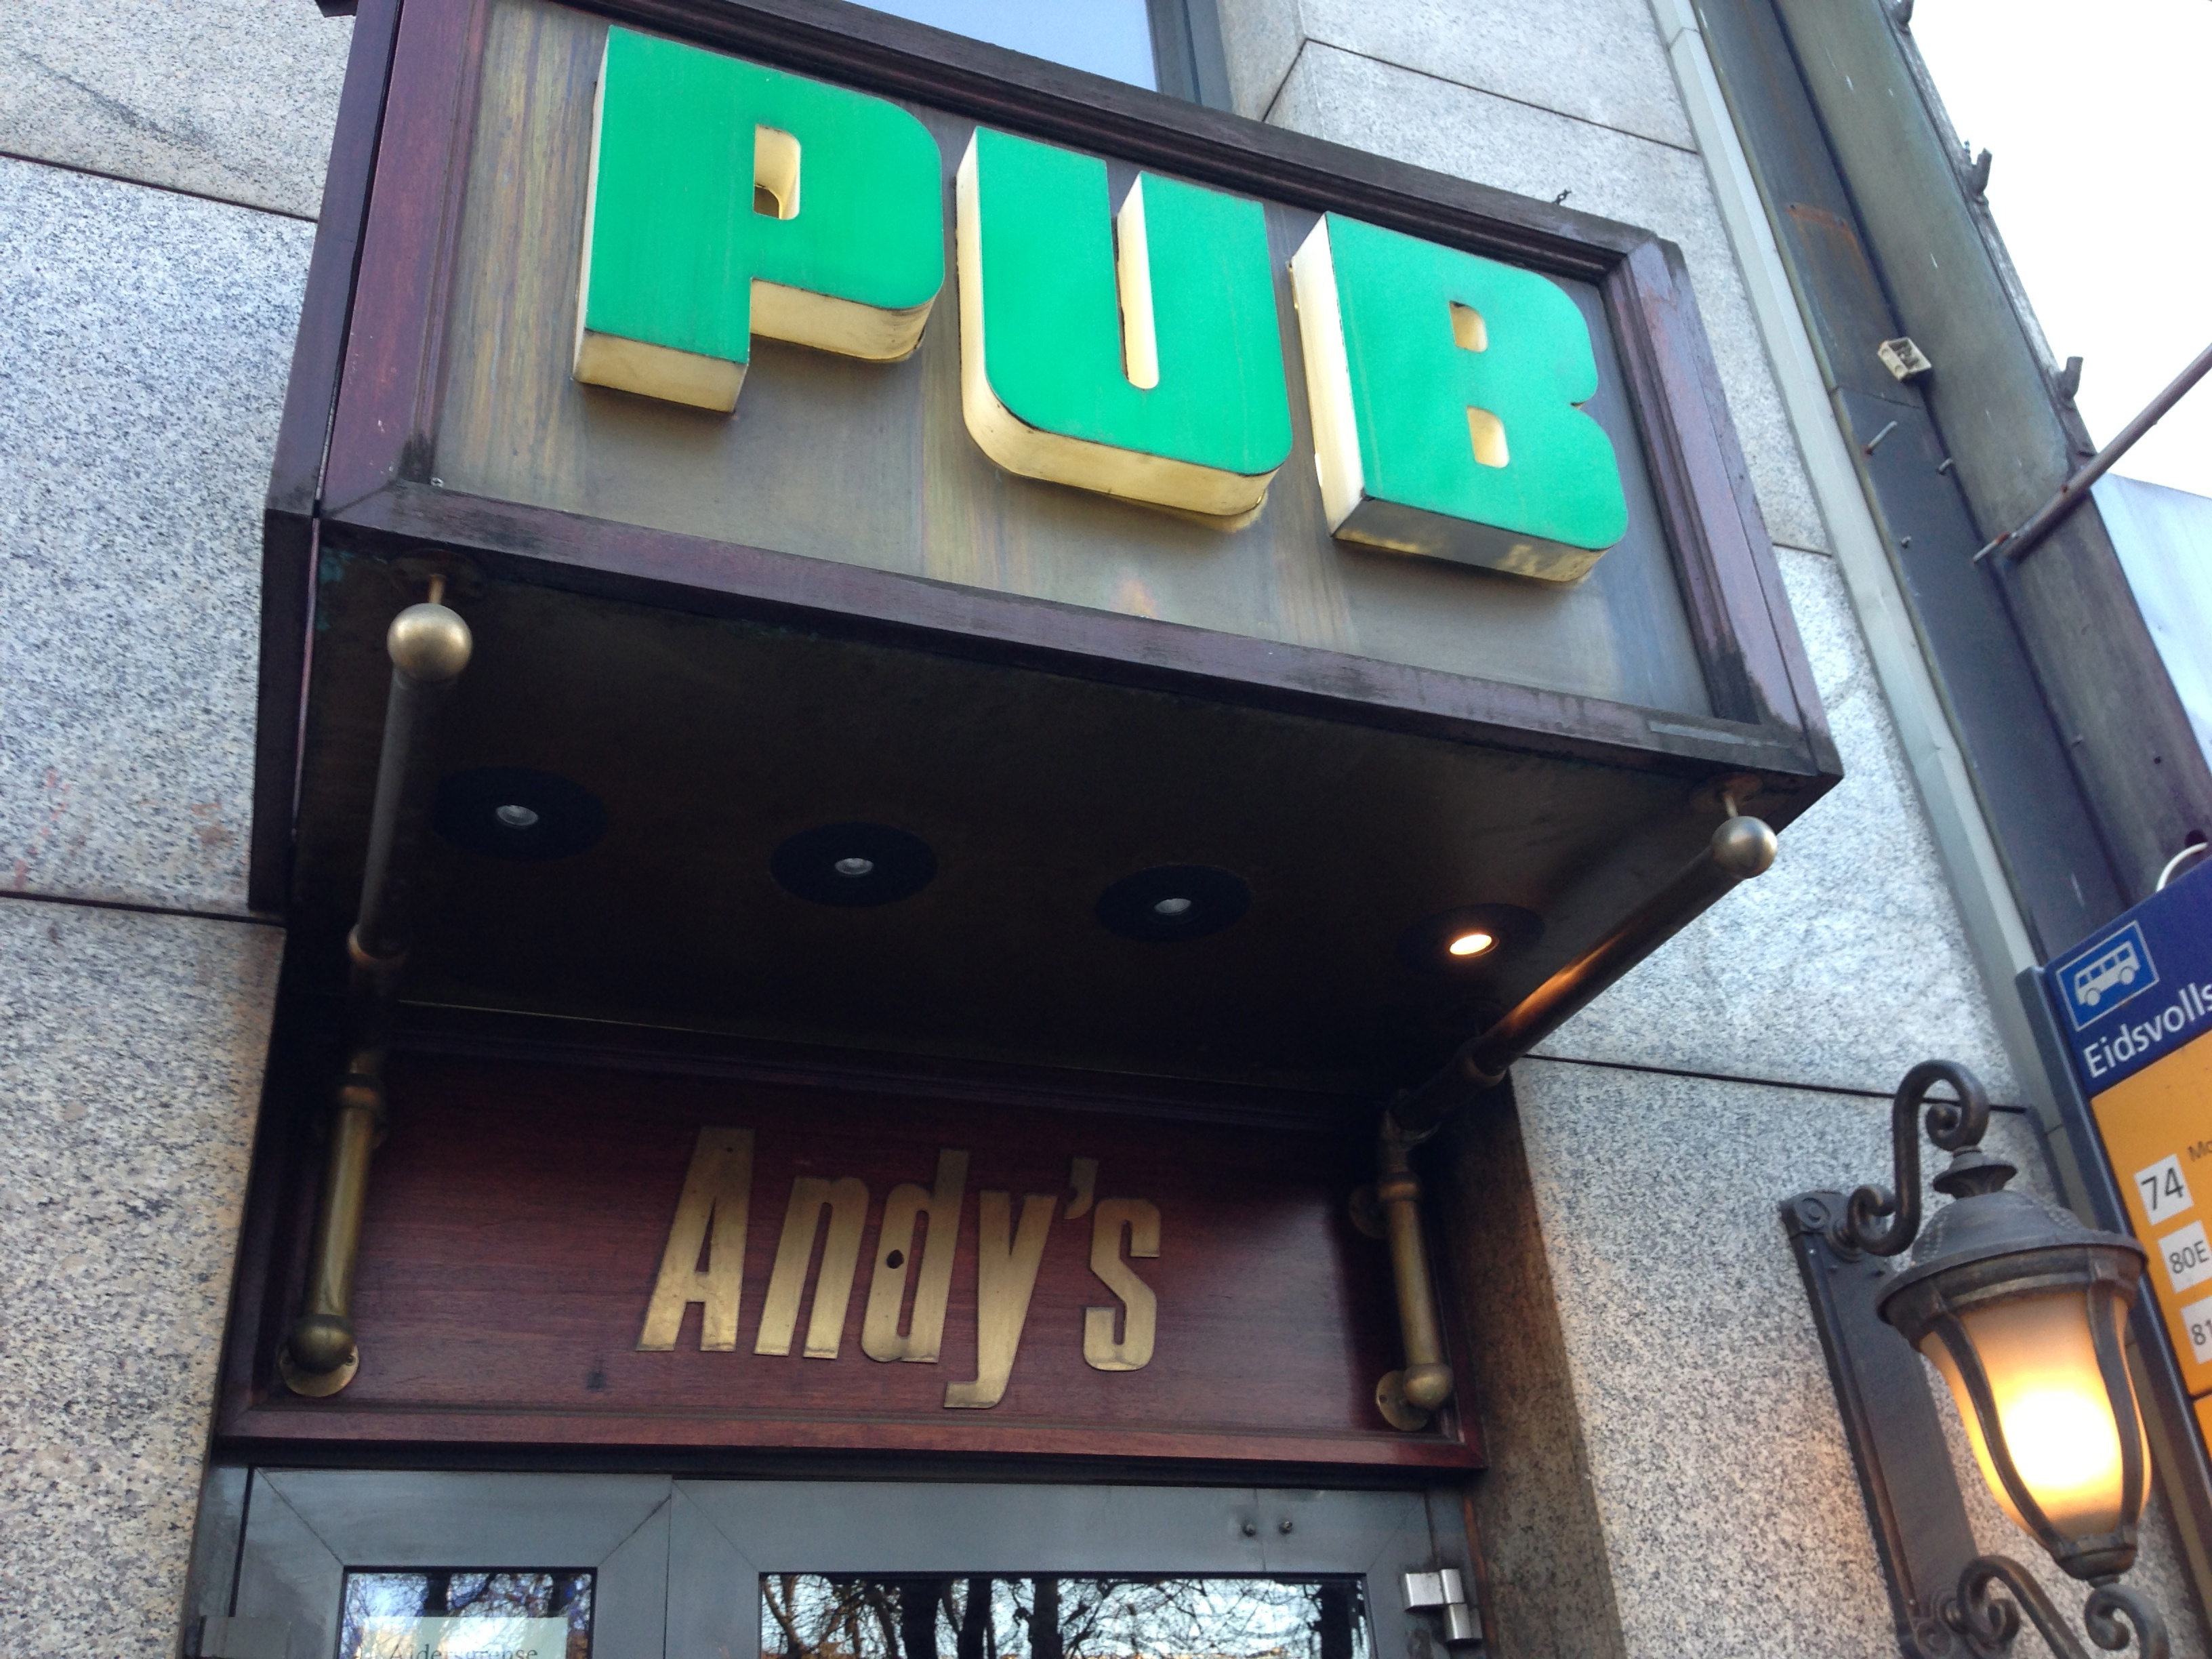 Oslo named a pub after me!